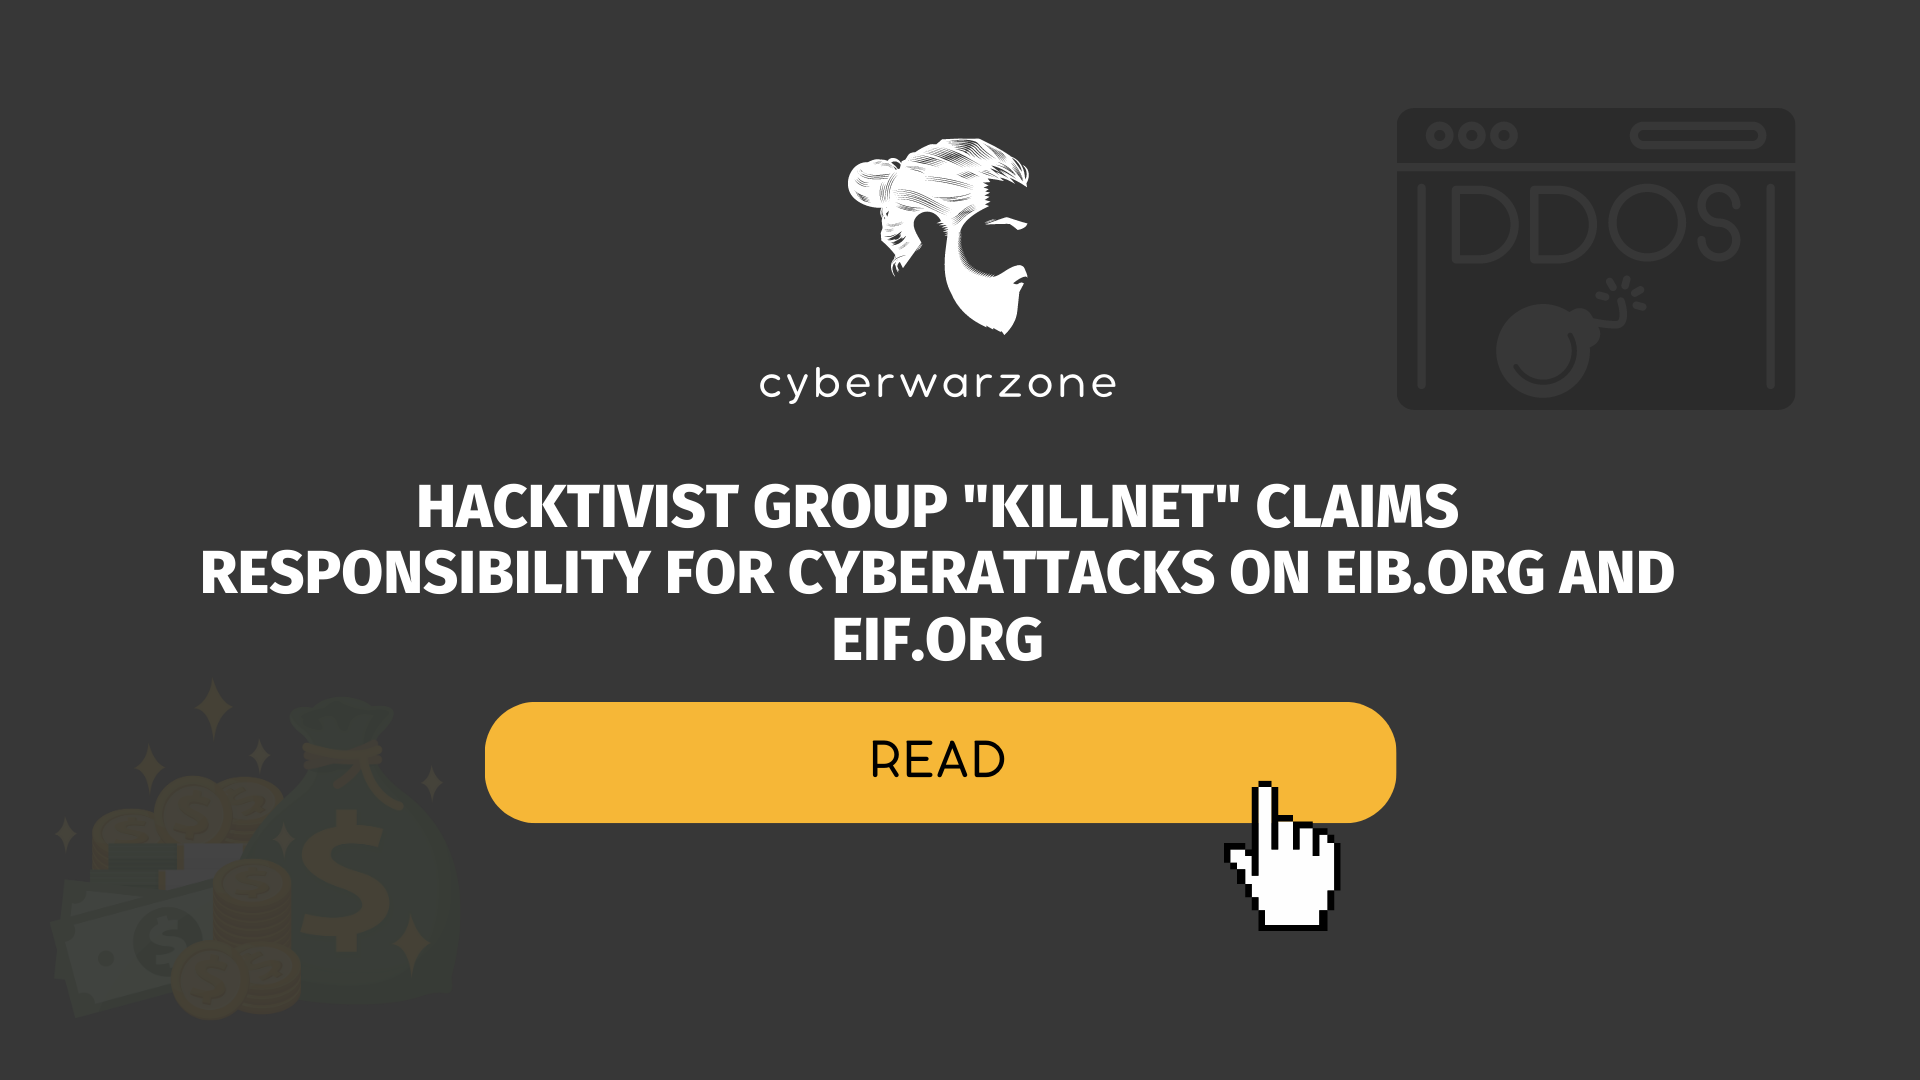 Hacktivist Group "Killnet" Claims Responsibility for Cyberattacks on EIB.org and EIF.org